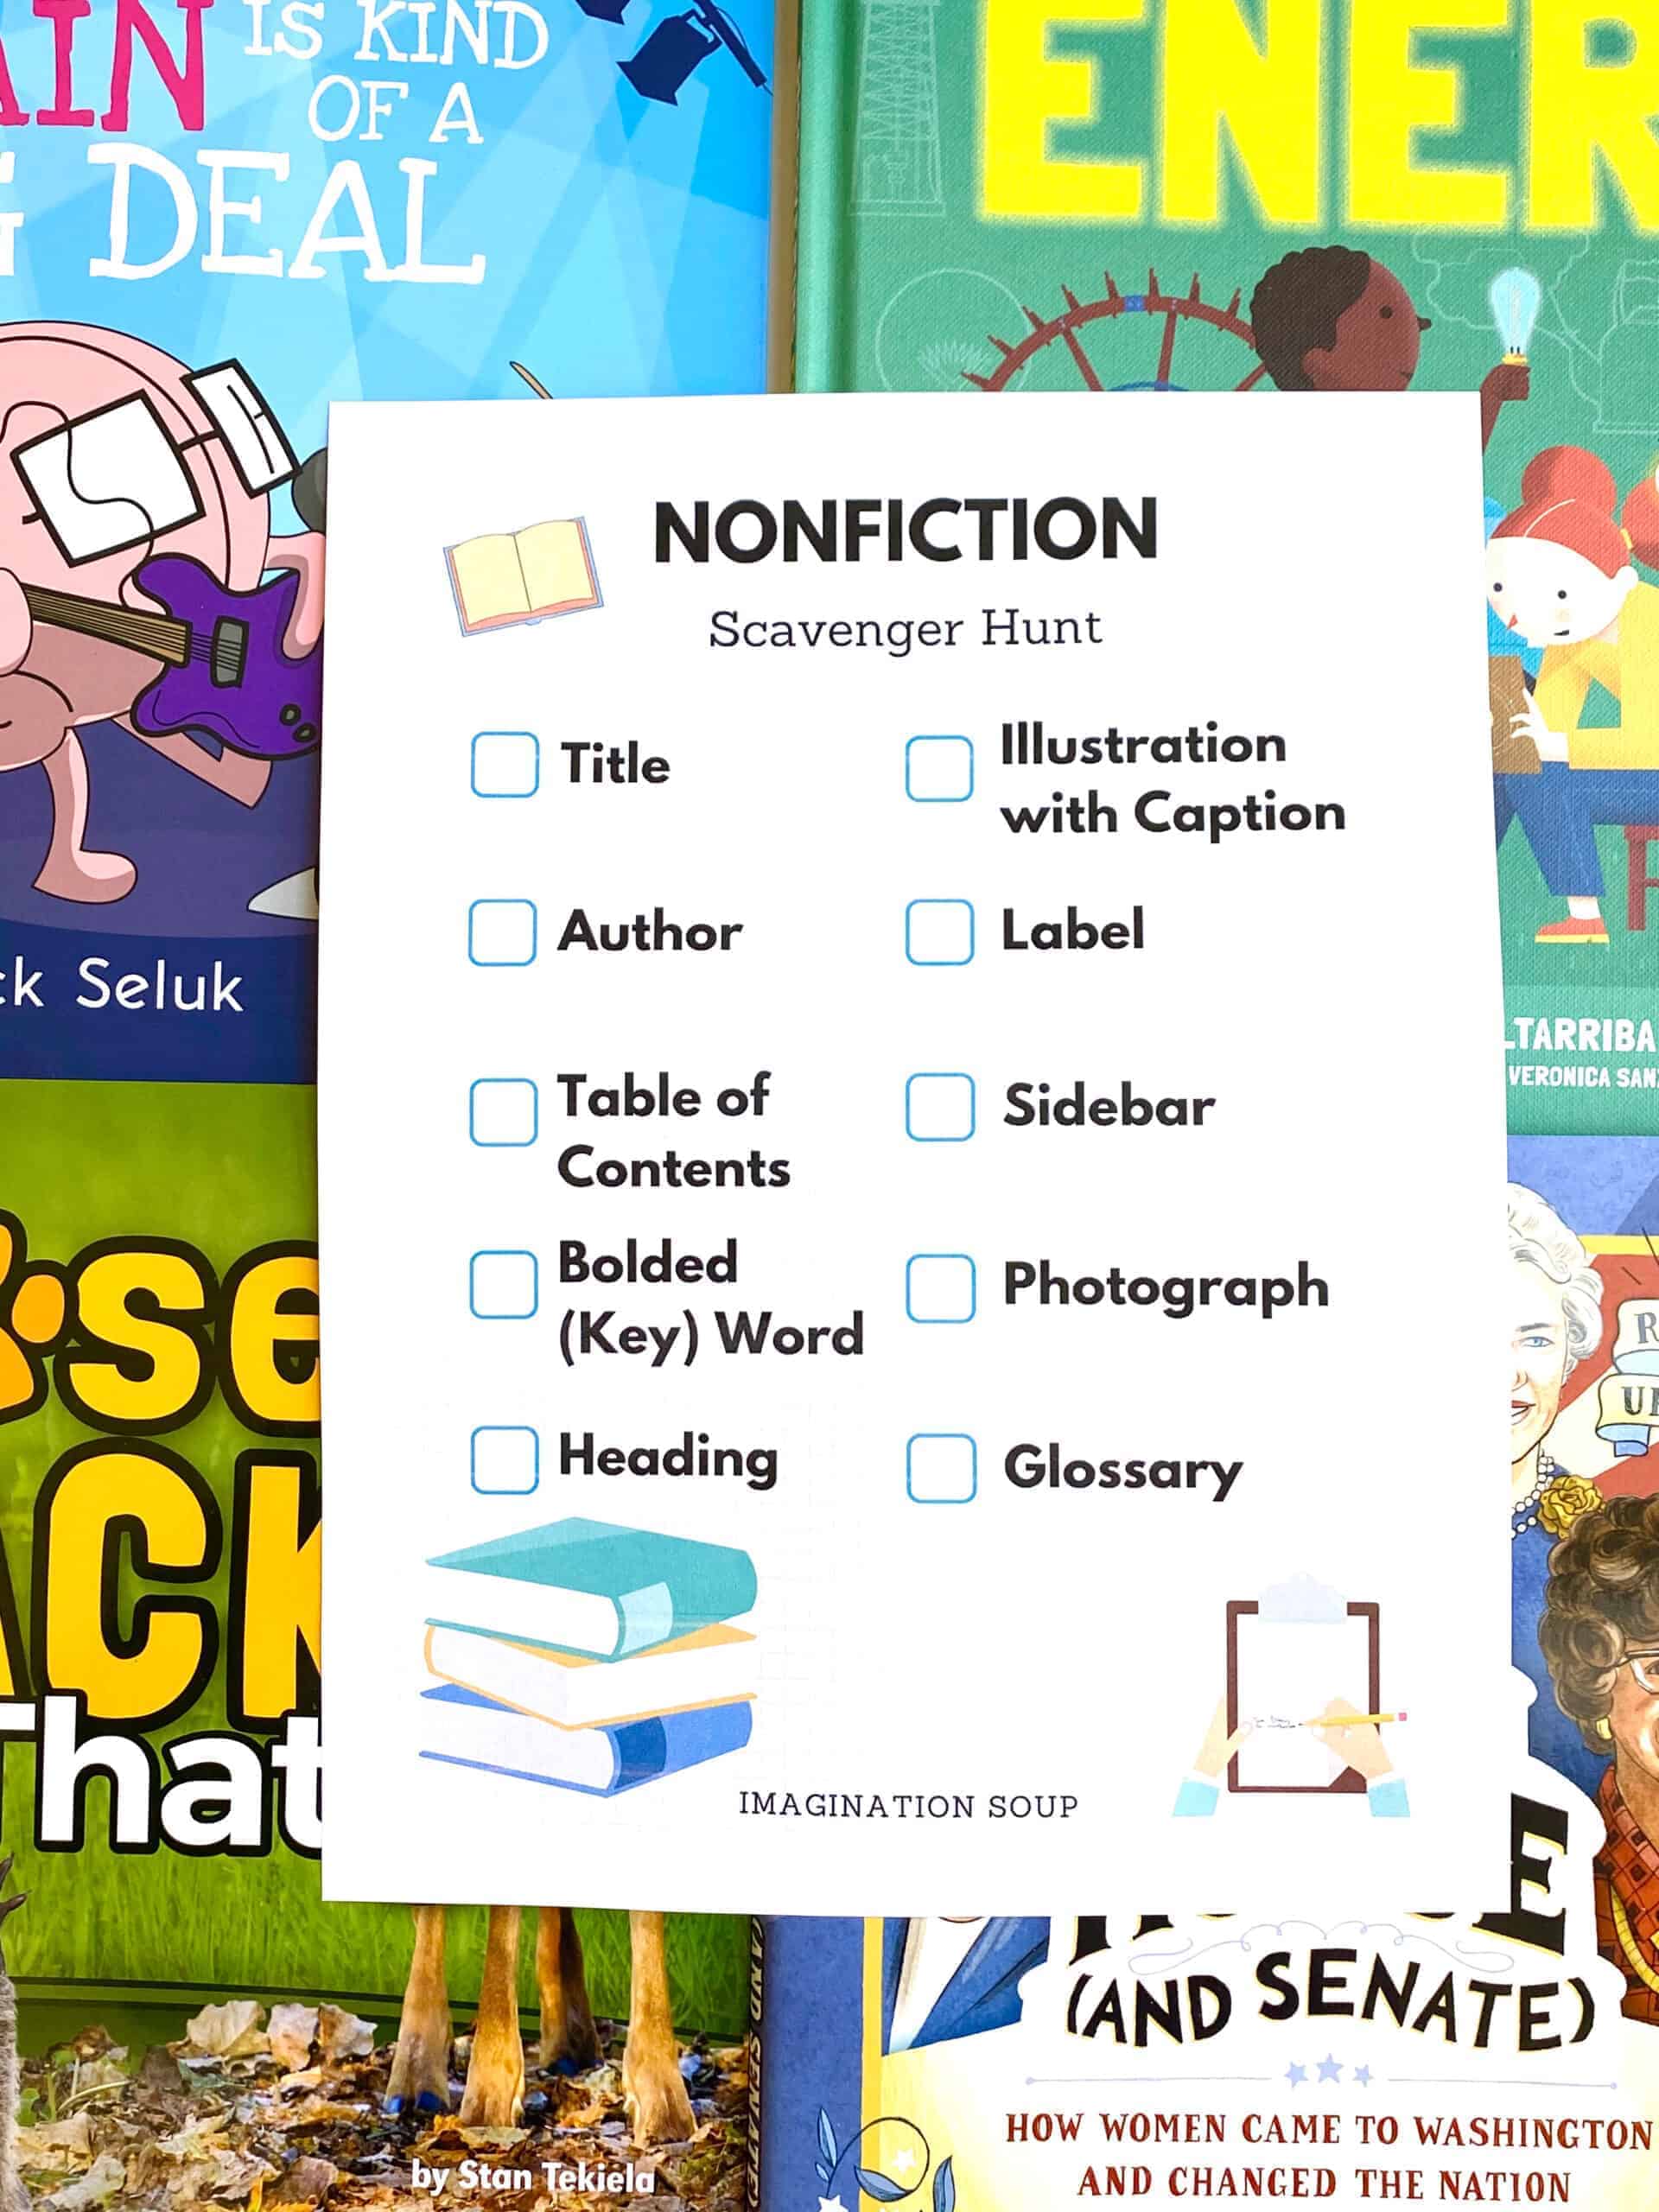 table of contents for kids nonfiction